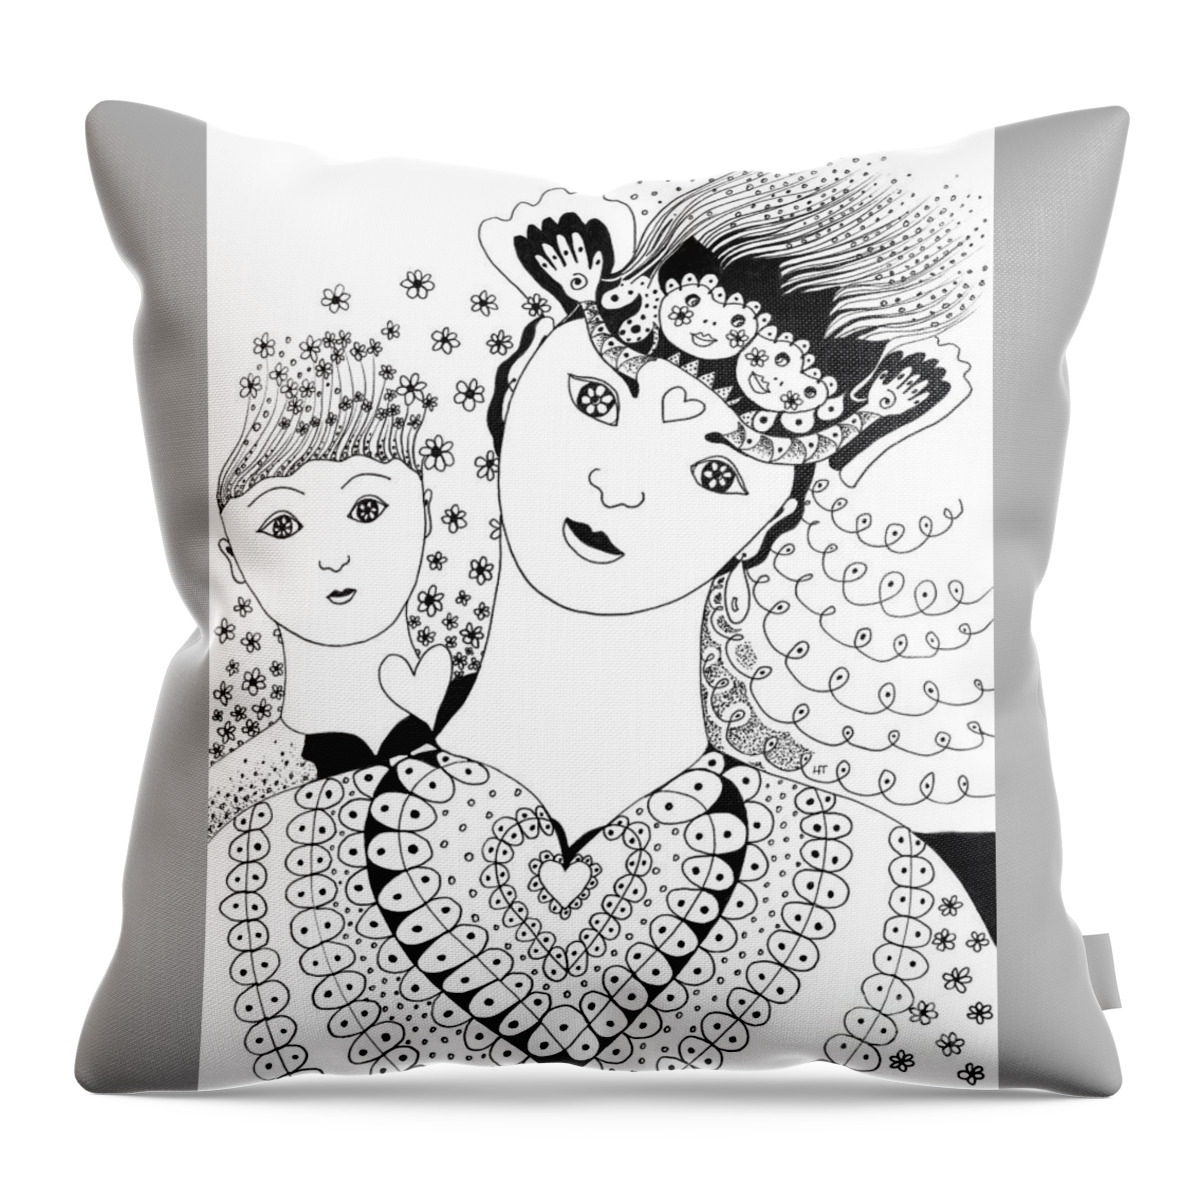 There Is Beauty In Innocence By Helena Tiainen Throw Pillow featuring the drawing There Is Beauty In Innocence by Helena Tiainen